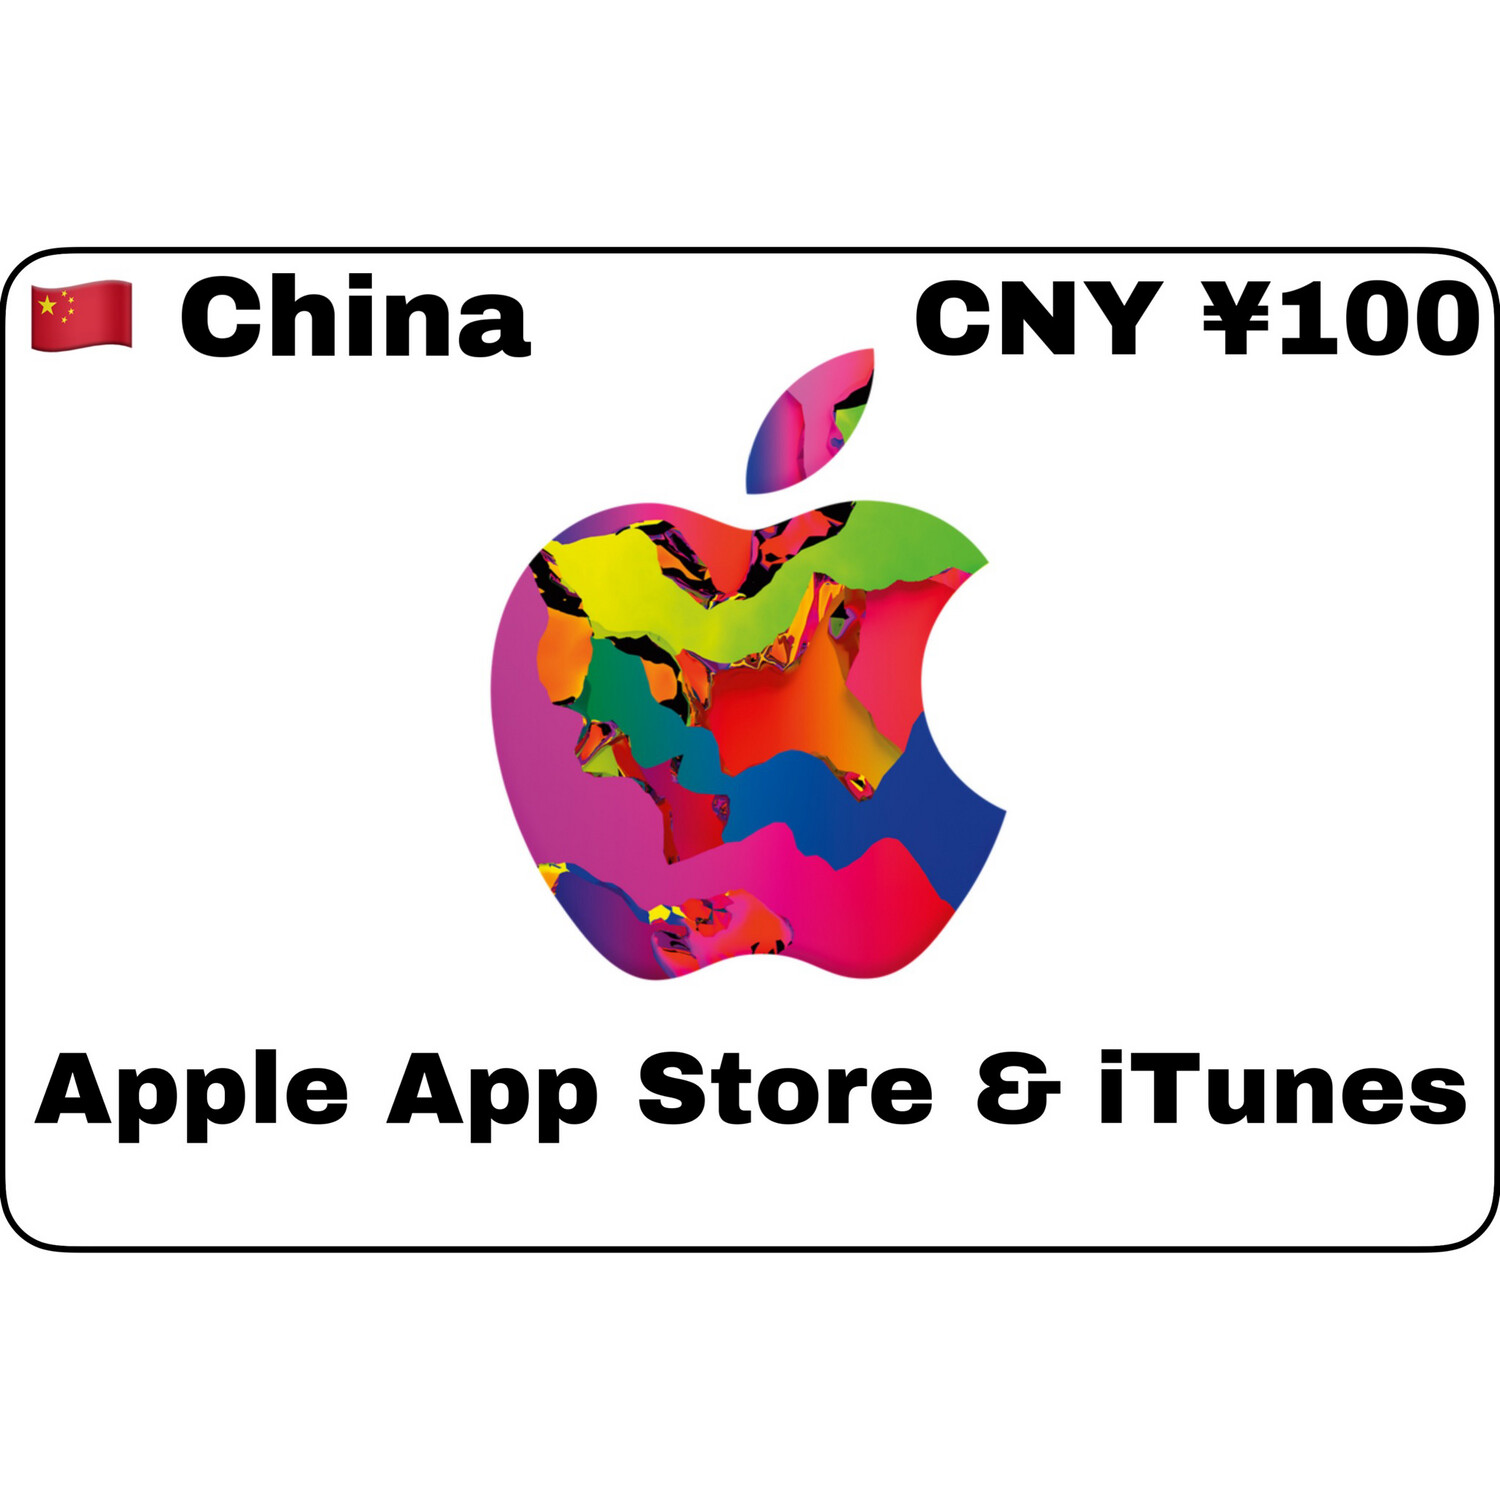 Apple iTunes Gift Card China CNY ¥100